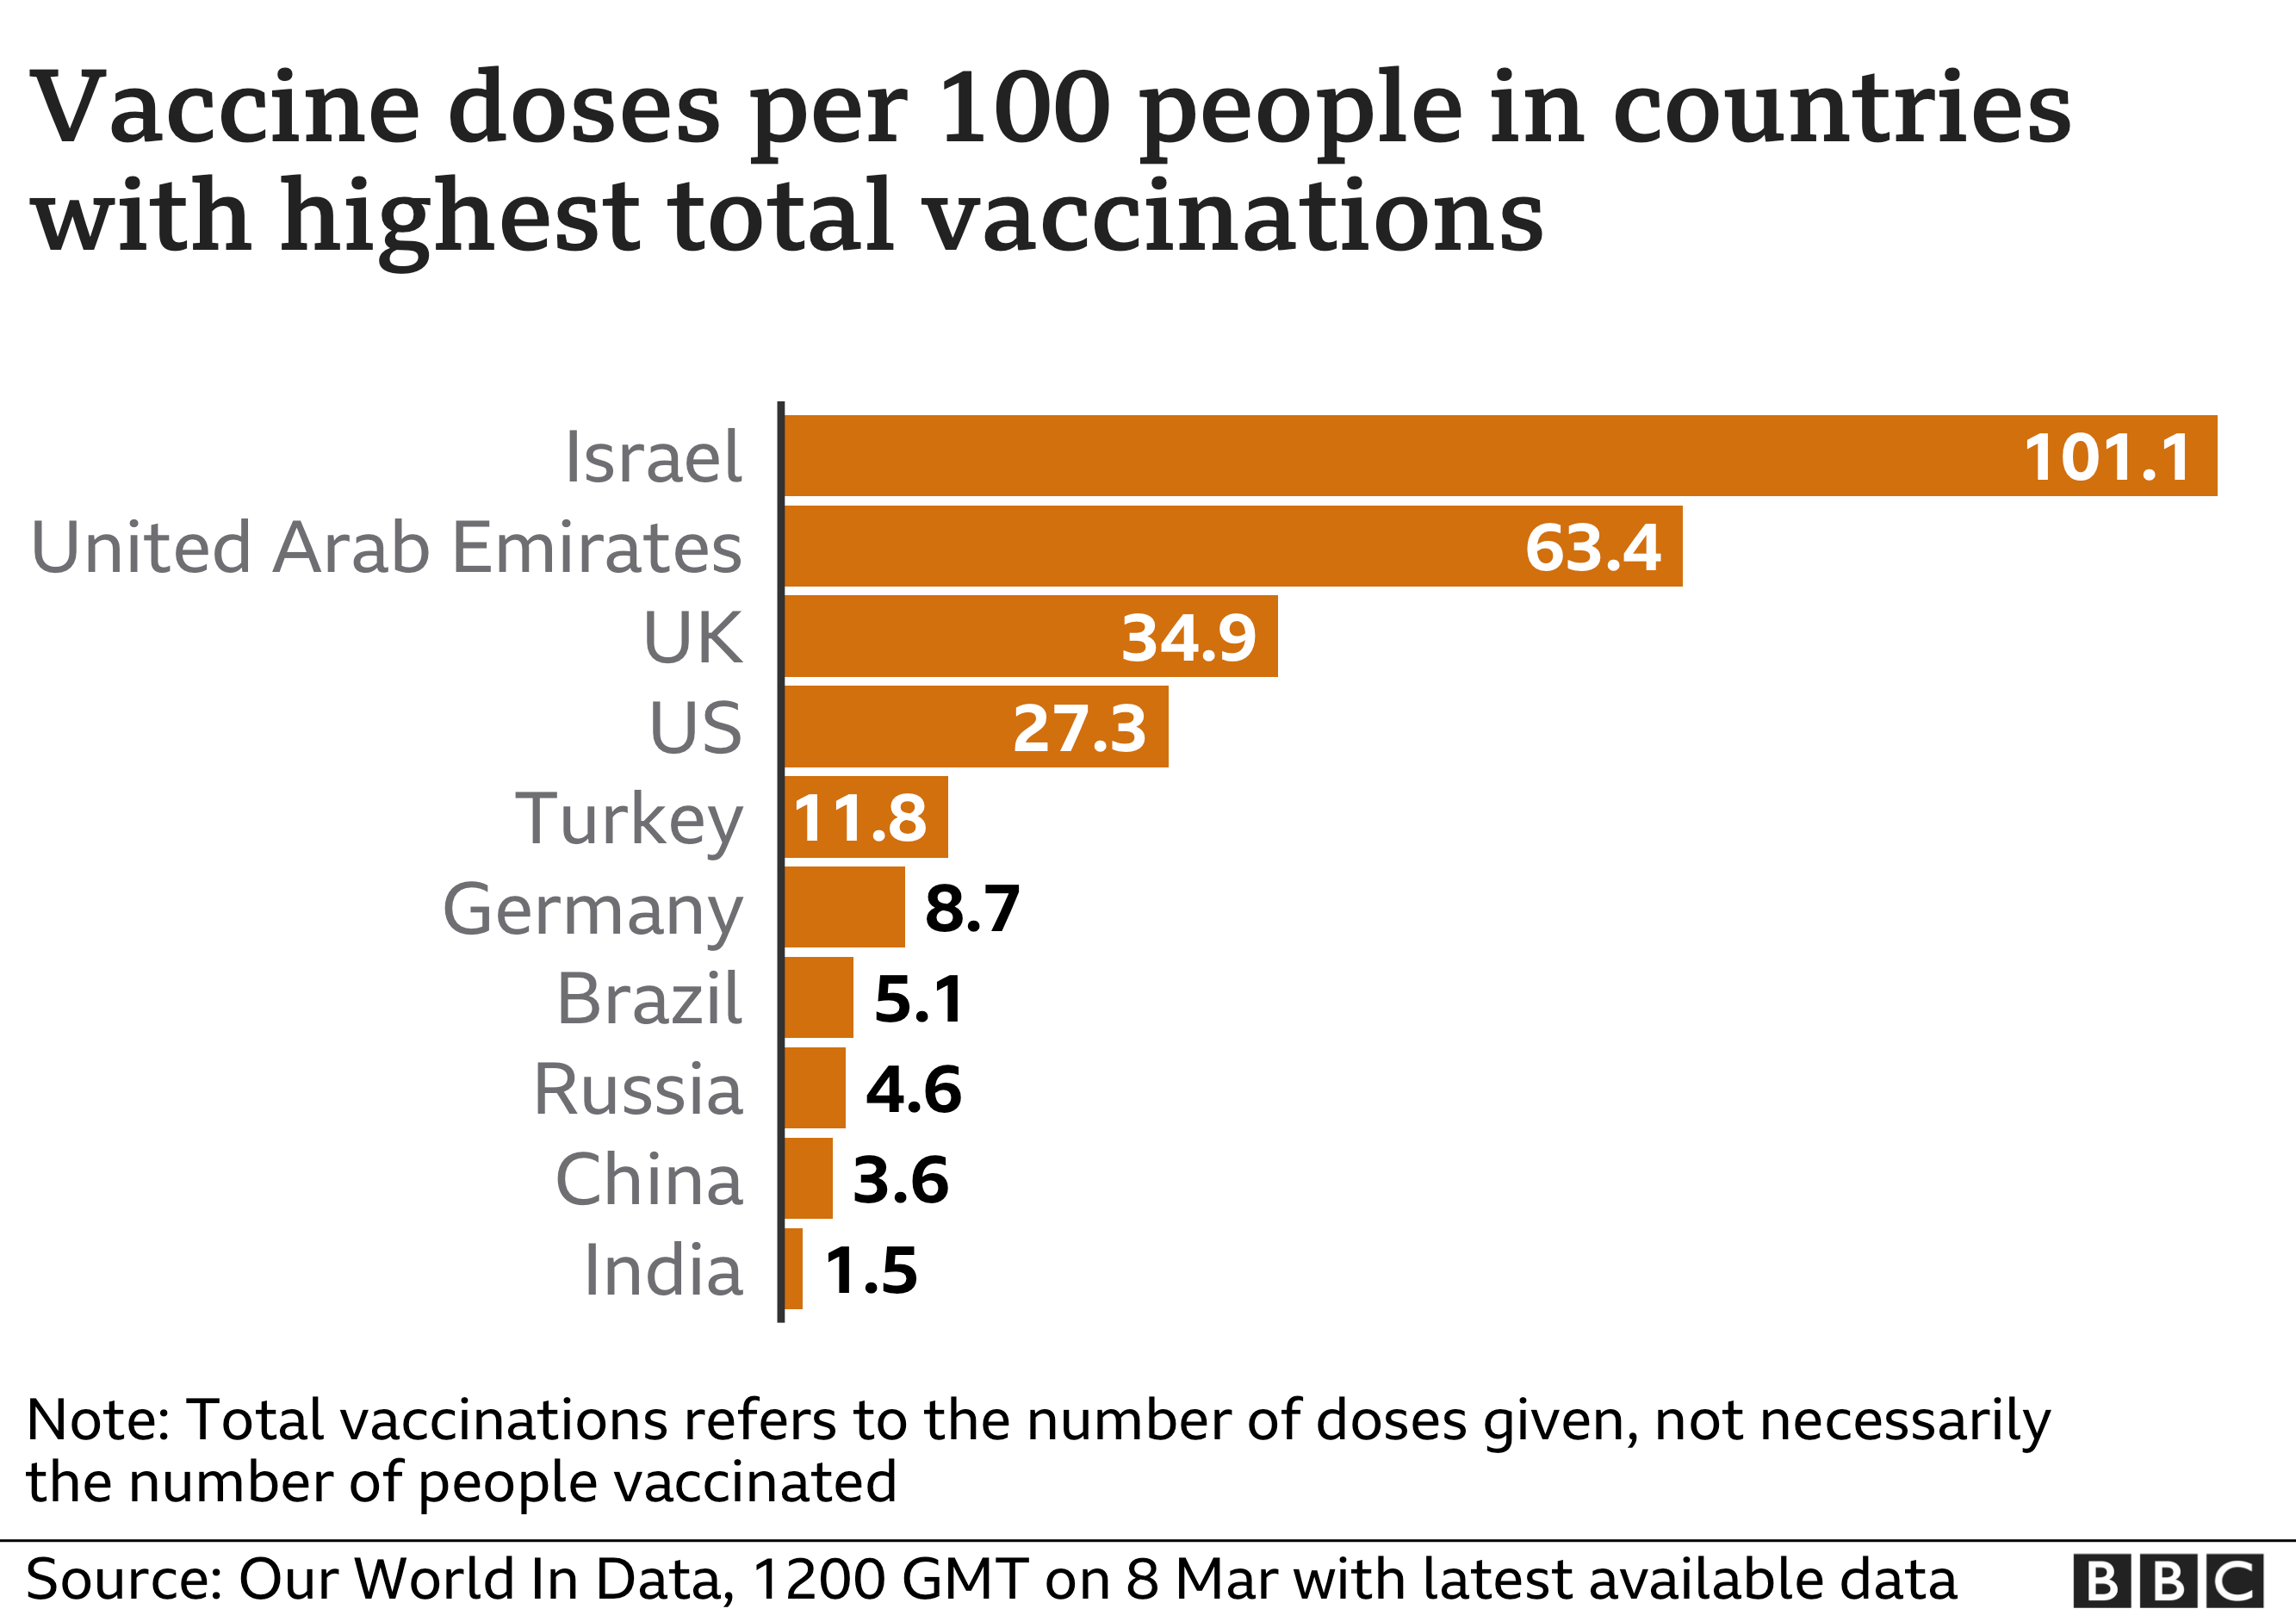 Chart showing vaccine doses given per 100 people in various countries